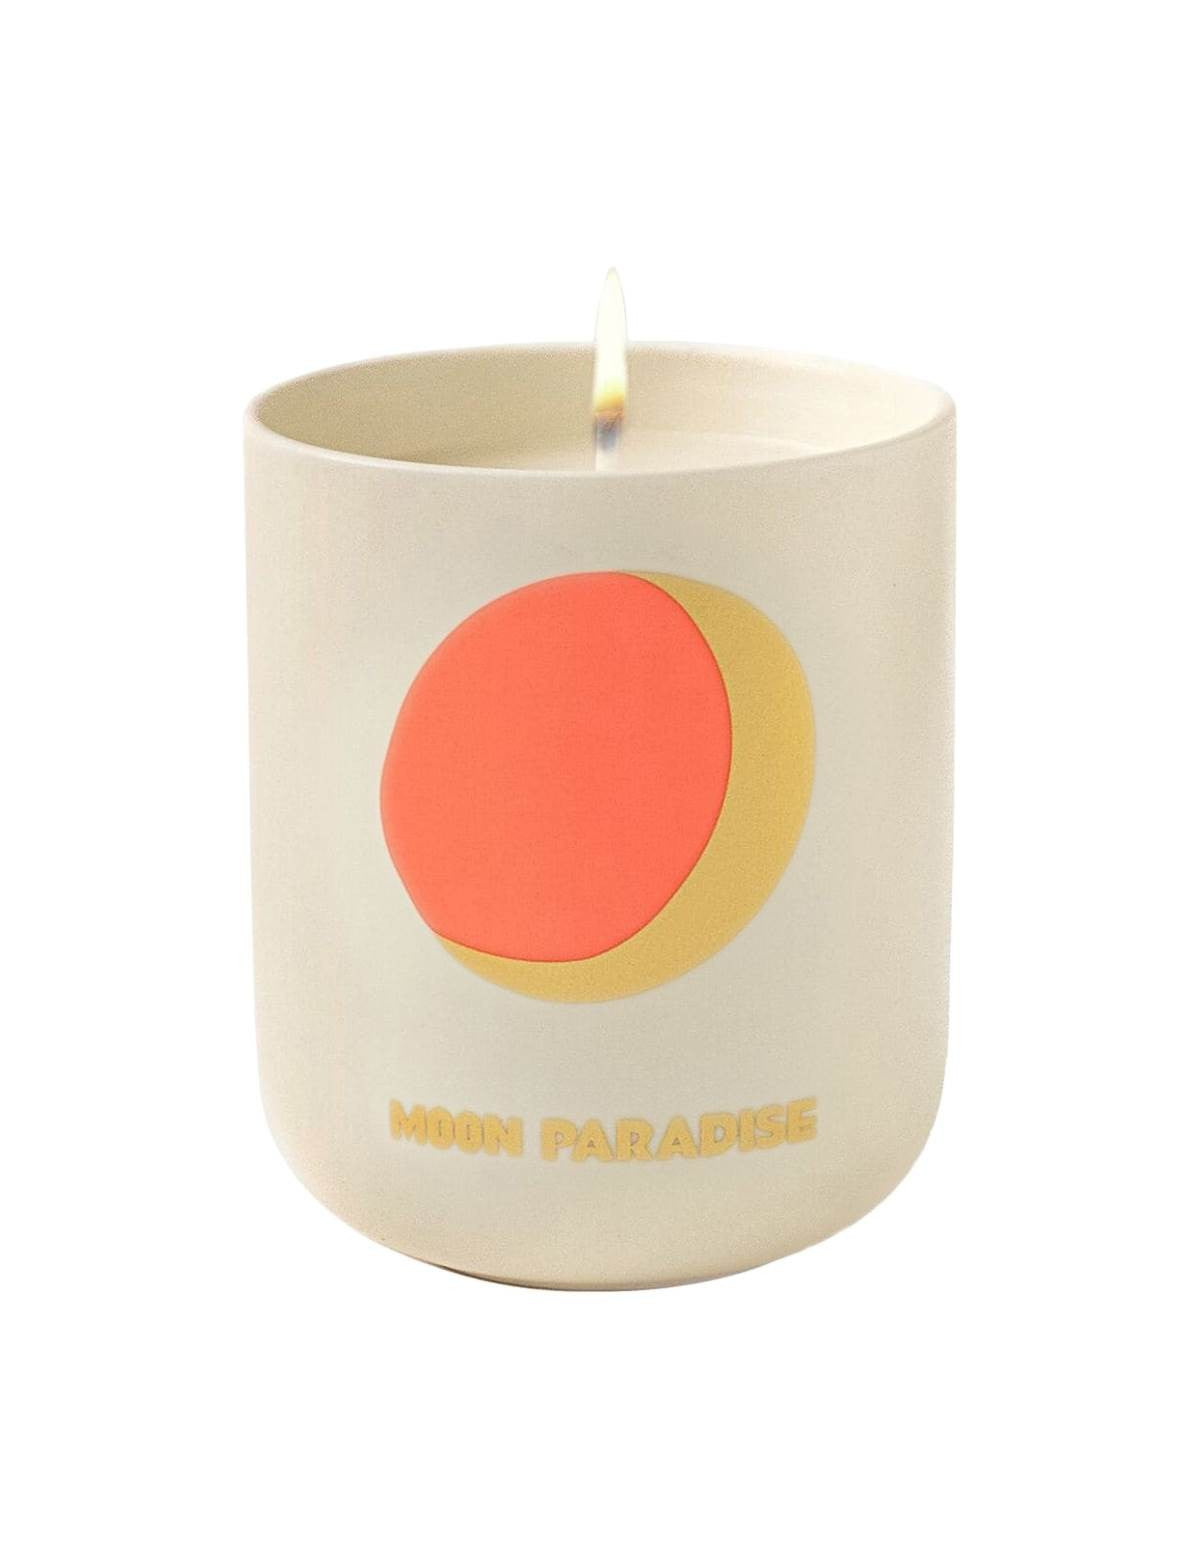 assouline-moon-paradise-scented-candle.jpg